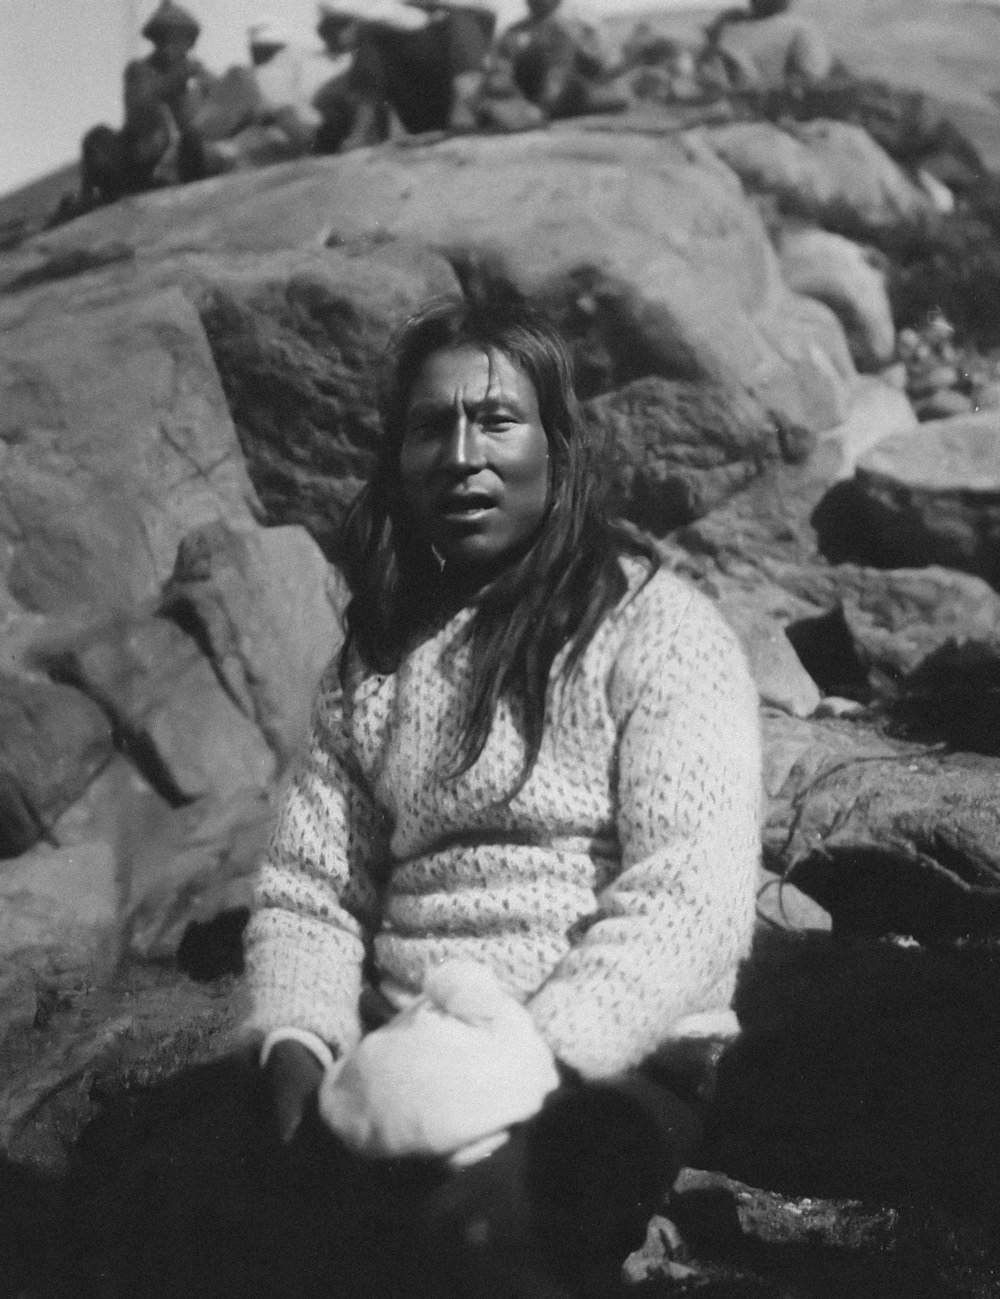 an old photo of a woman sitting on rocks